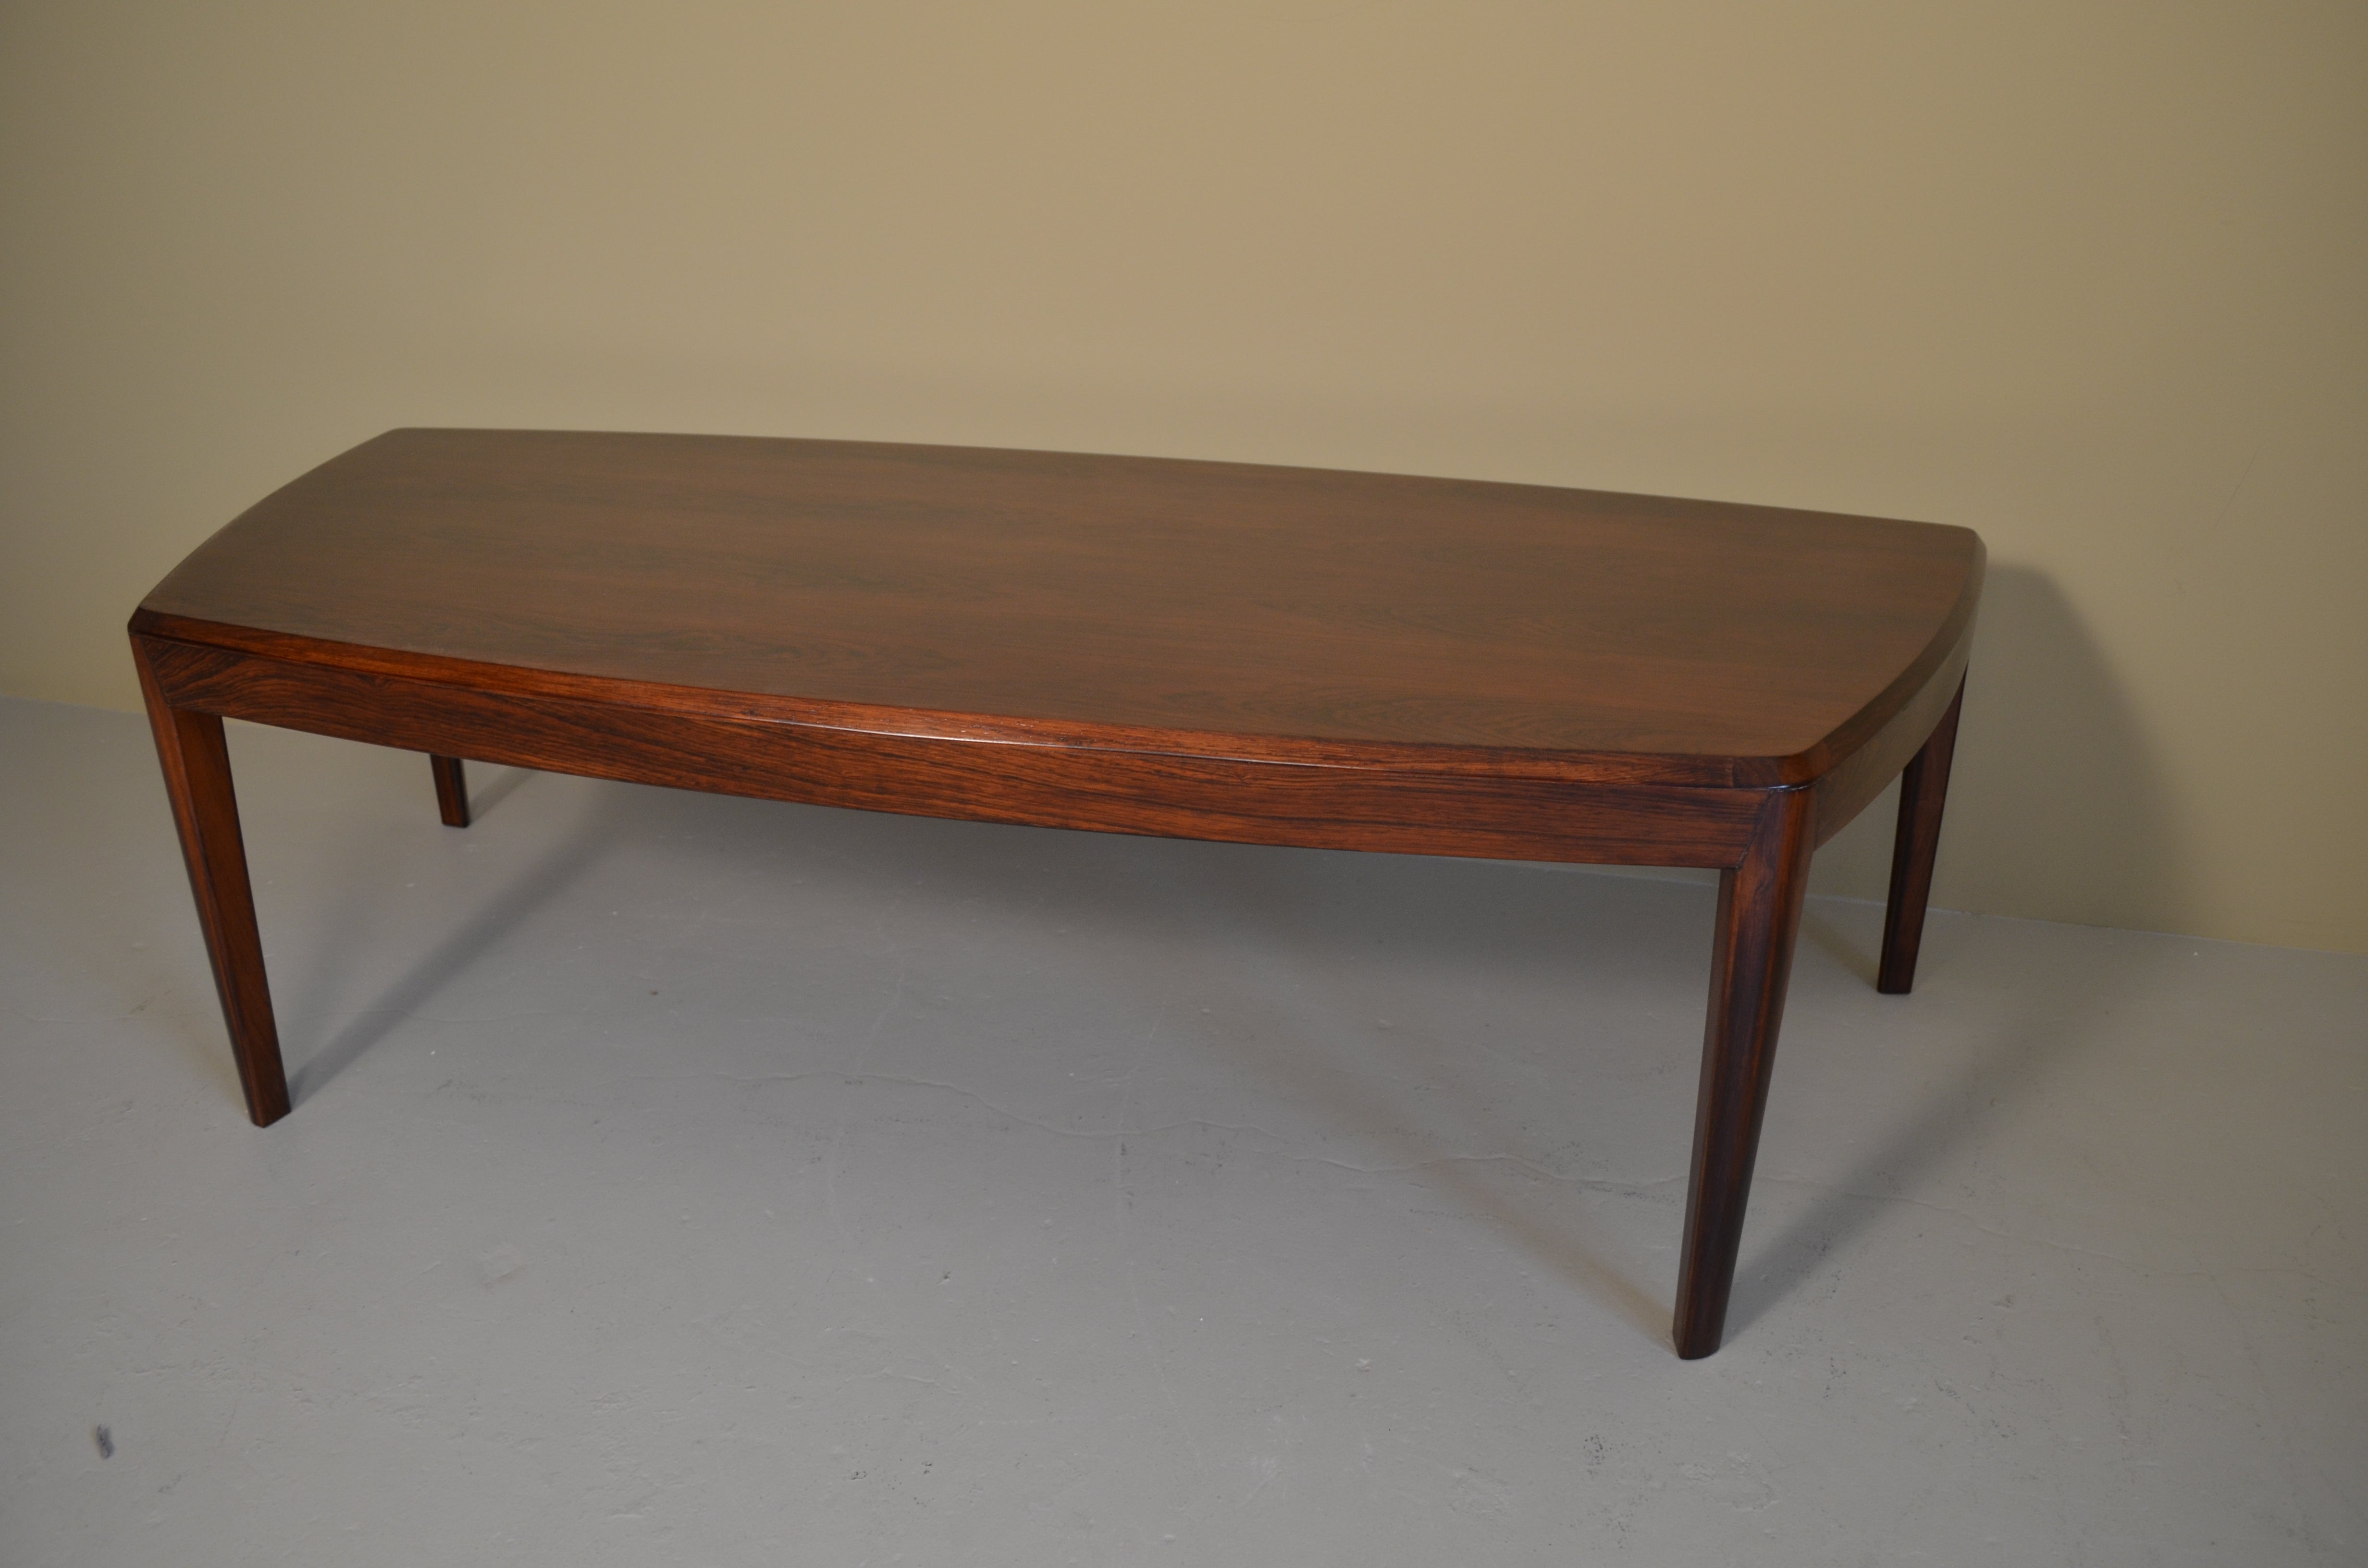 Rosewood Coffee Table with Tapered Legs